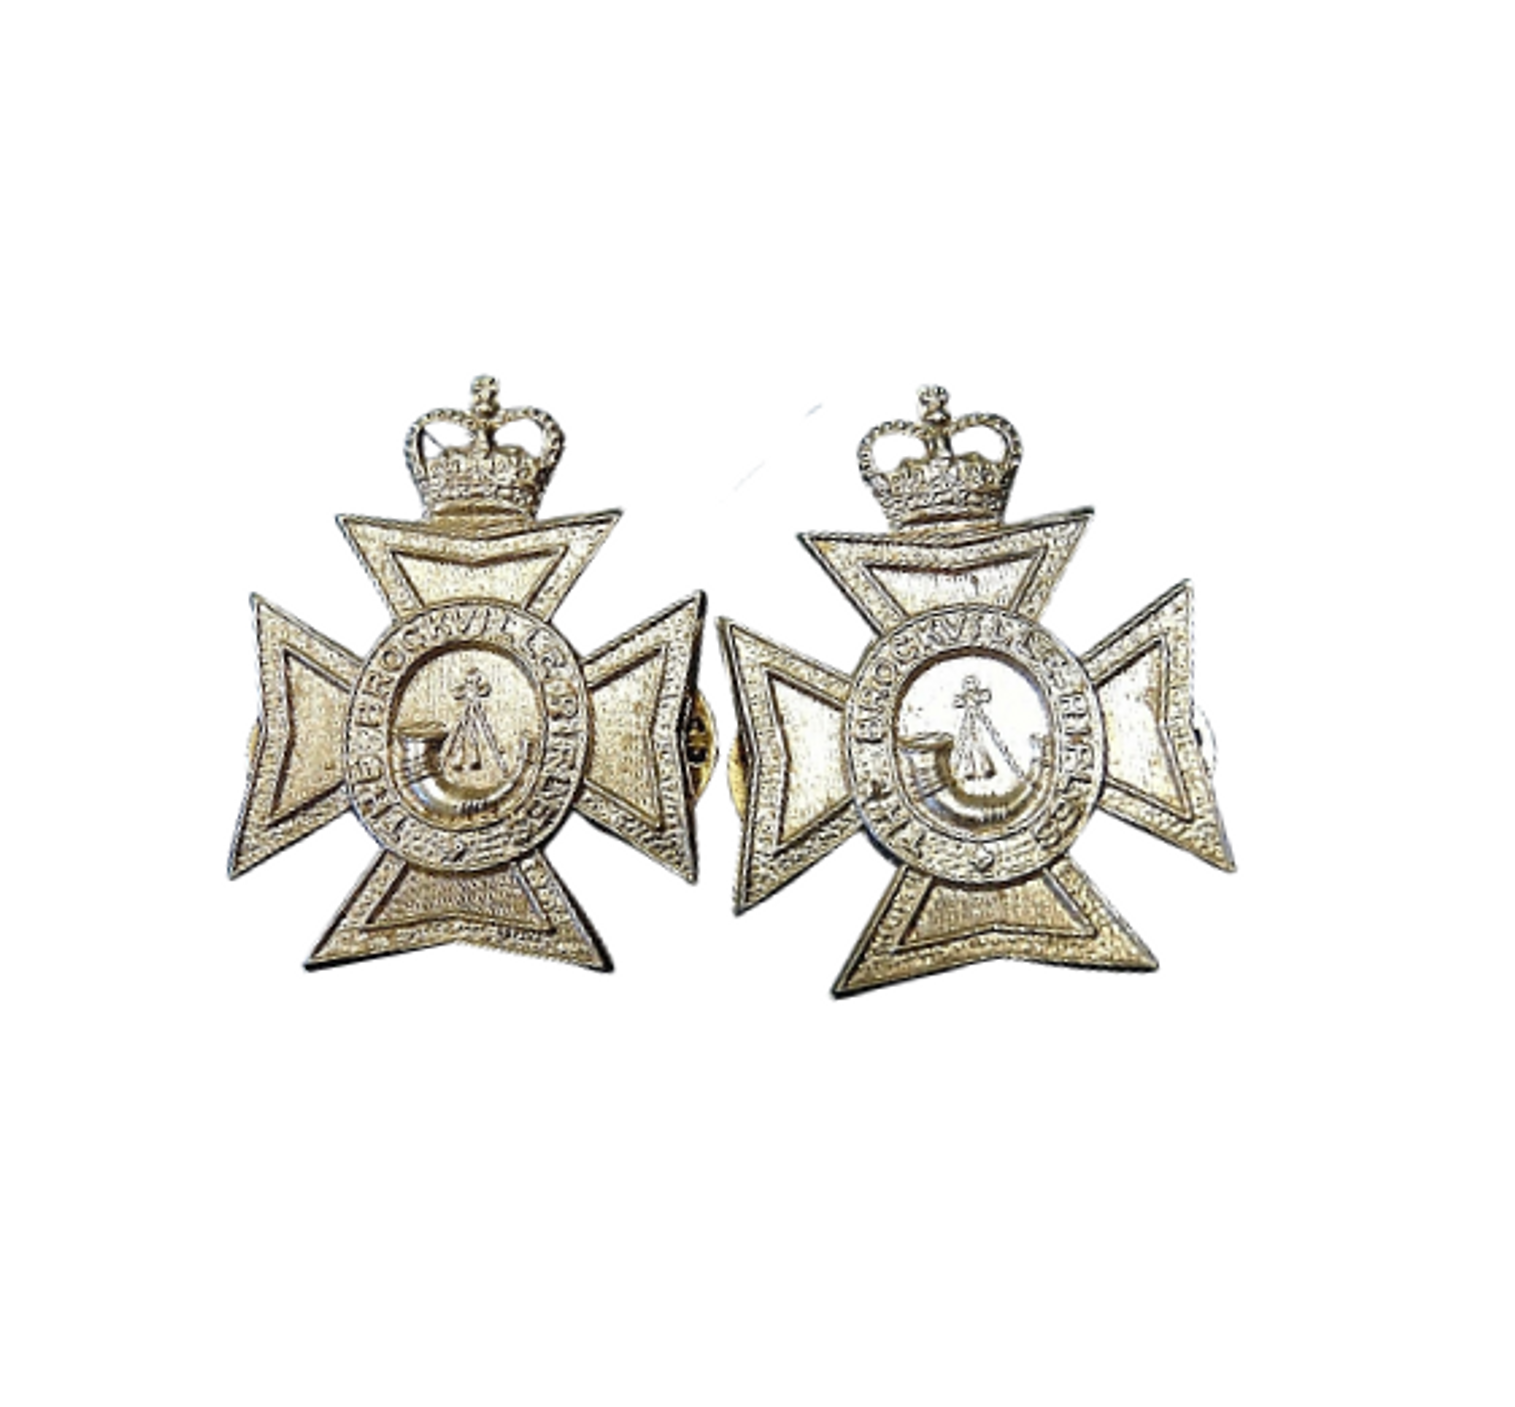 Canadian Armed Forces Brockville Rifles Queen's Crown Collar Badge (Pair)